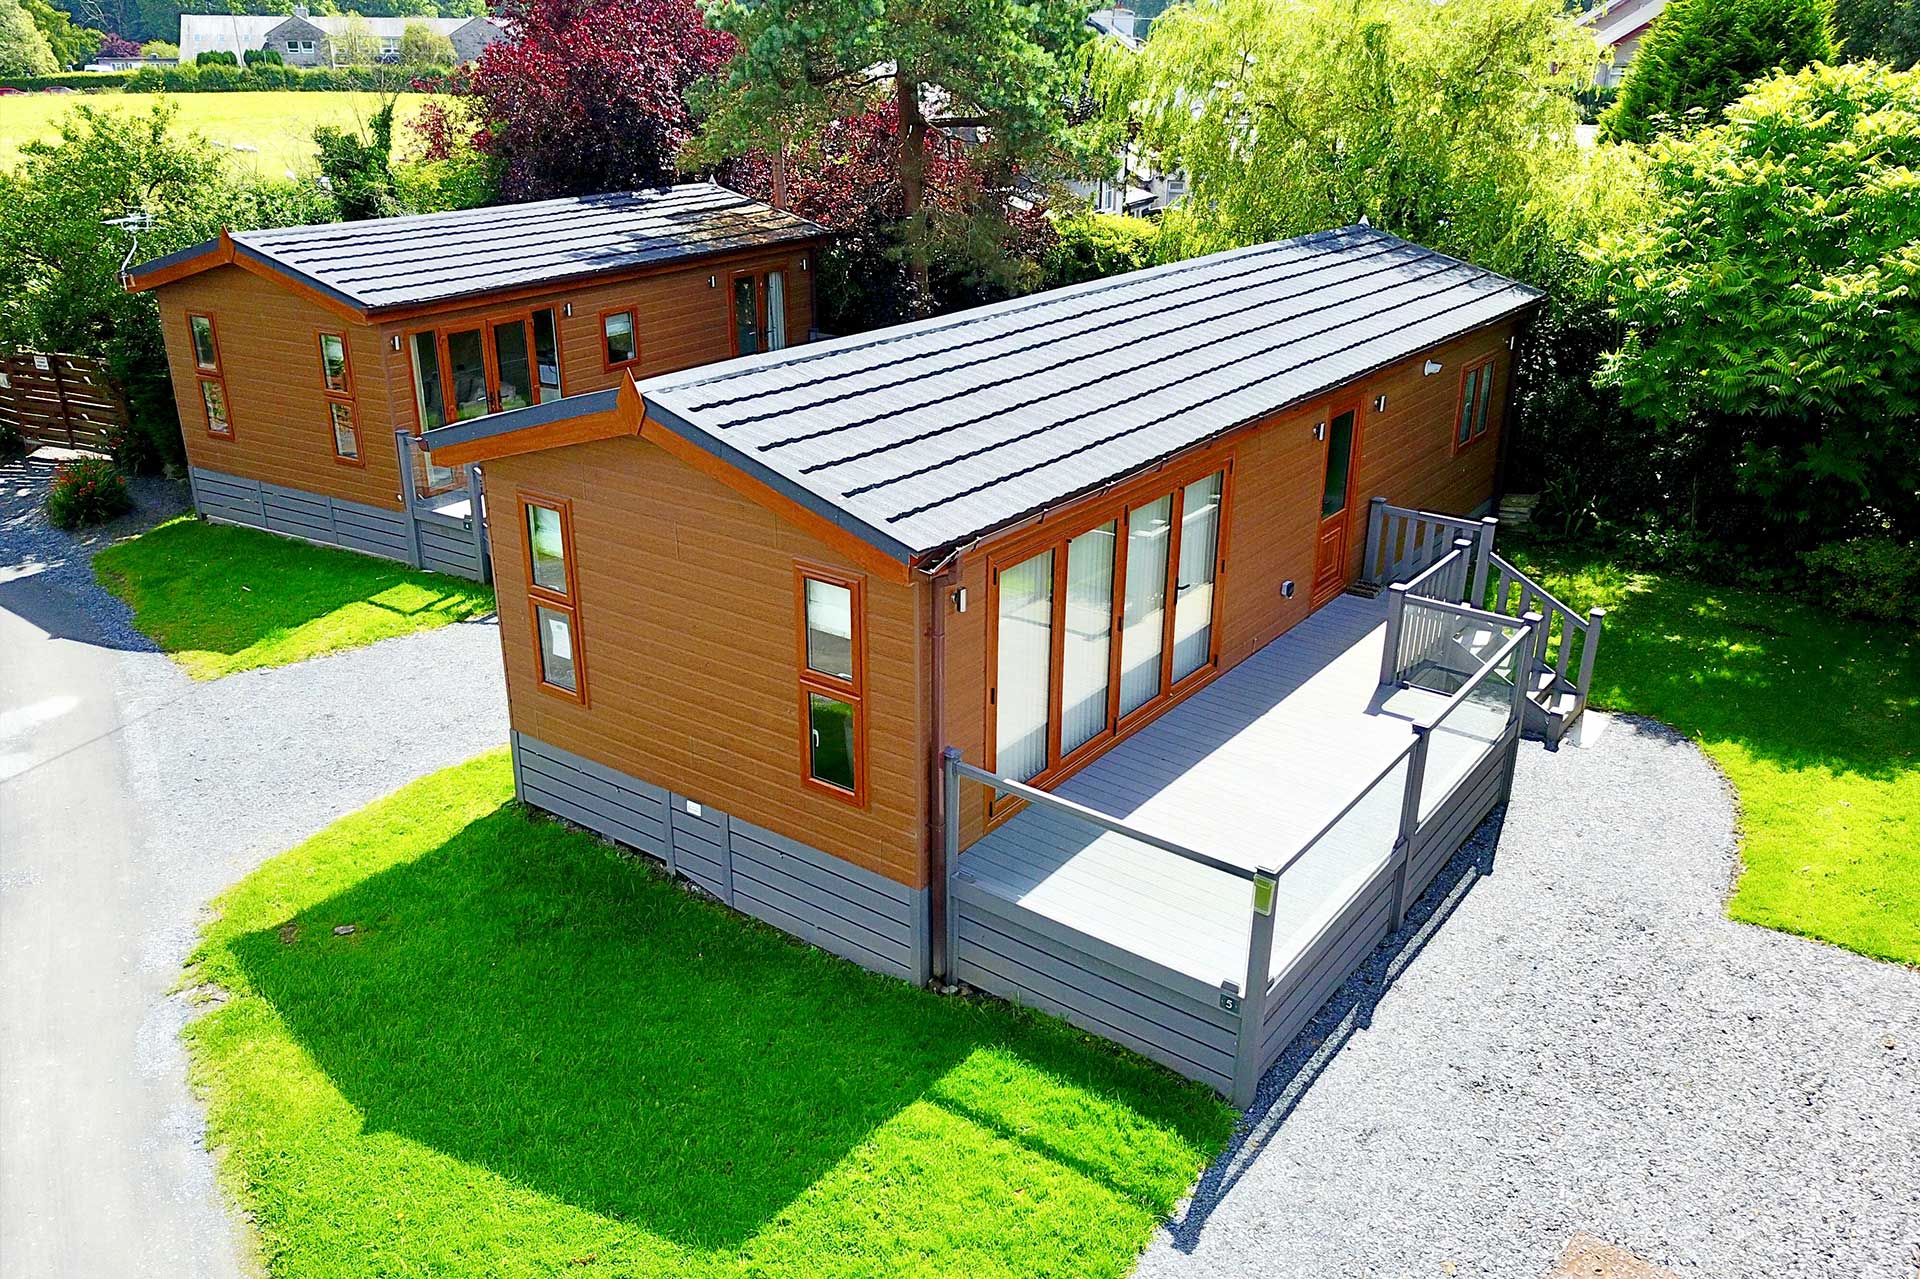 Lake District Pre-owned lodges for sale